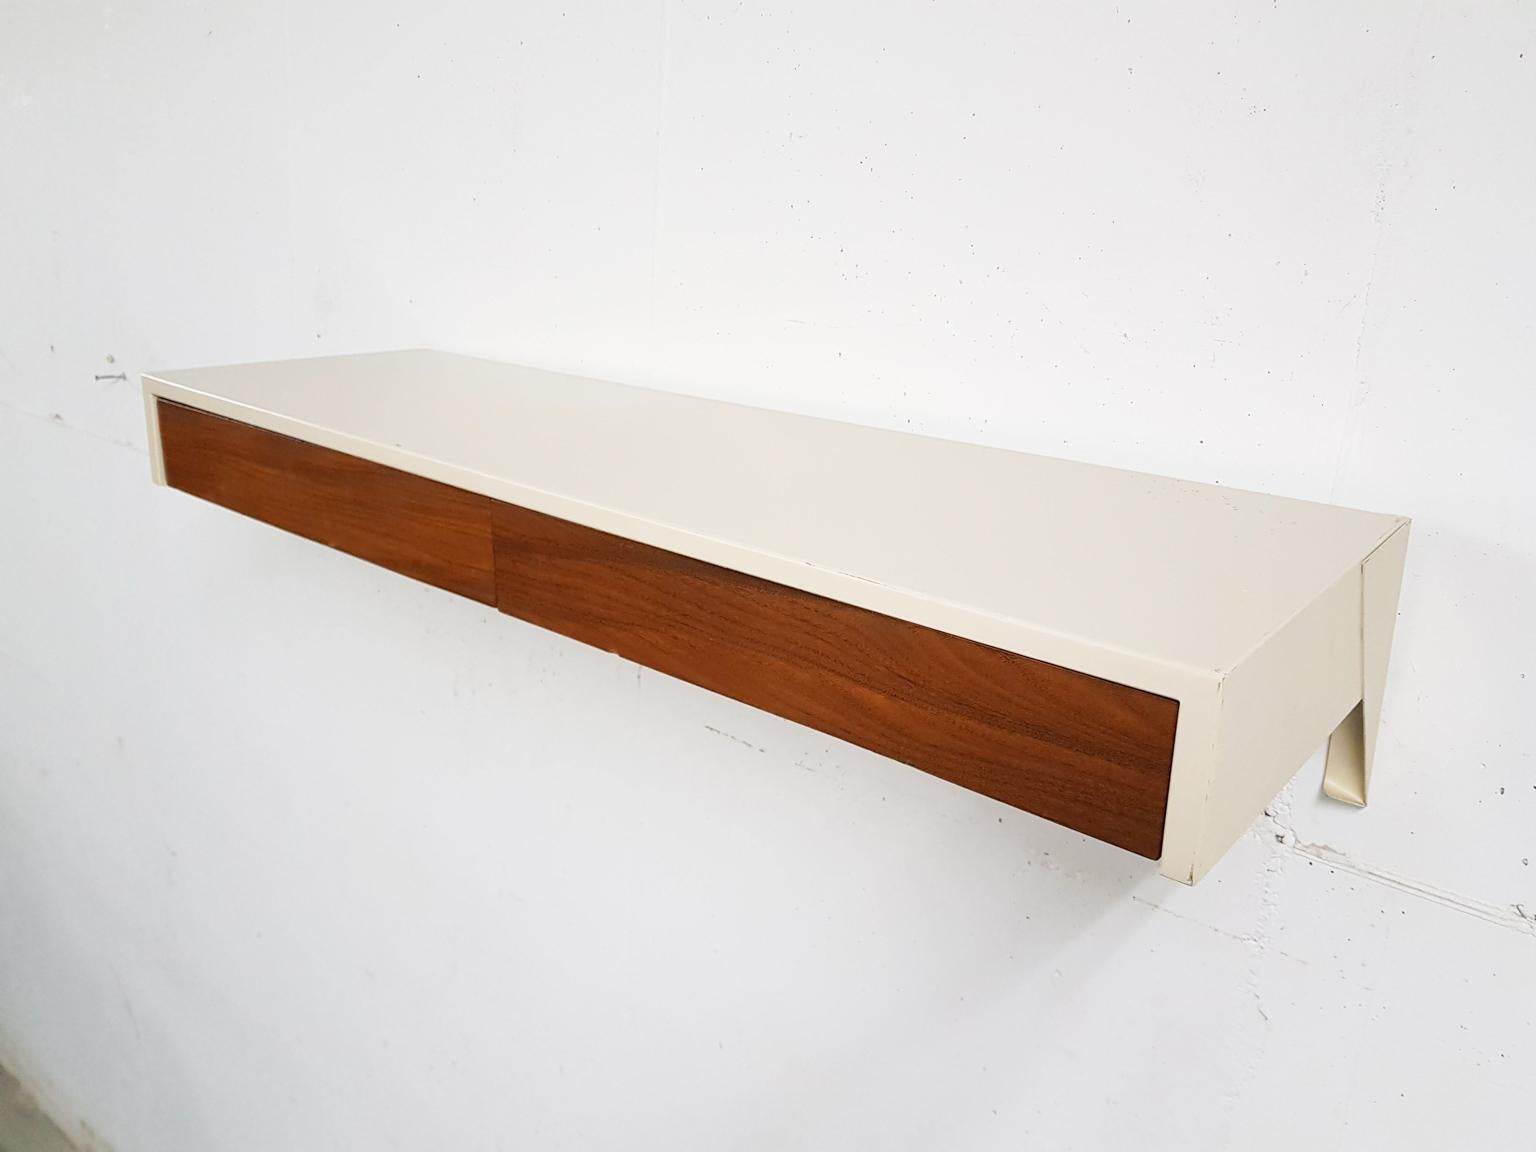 Wall shelve with drawers which can be uses as a small desk or vanity table. This model DD02 or 